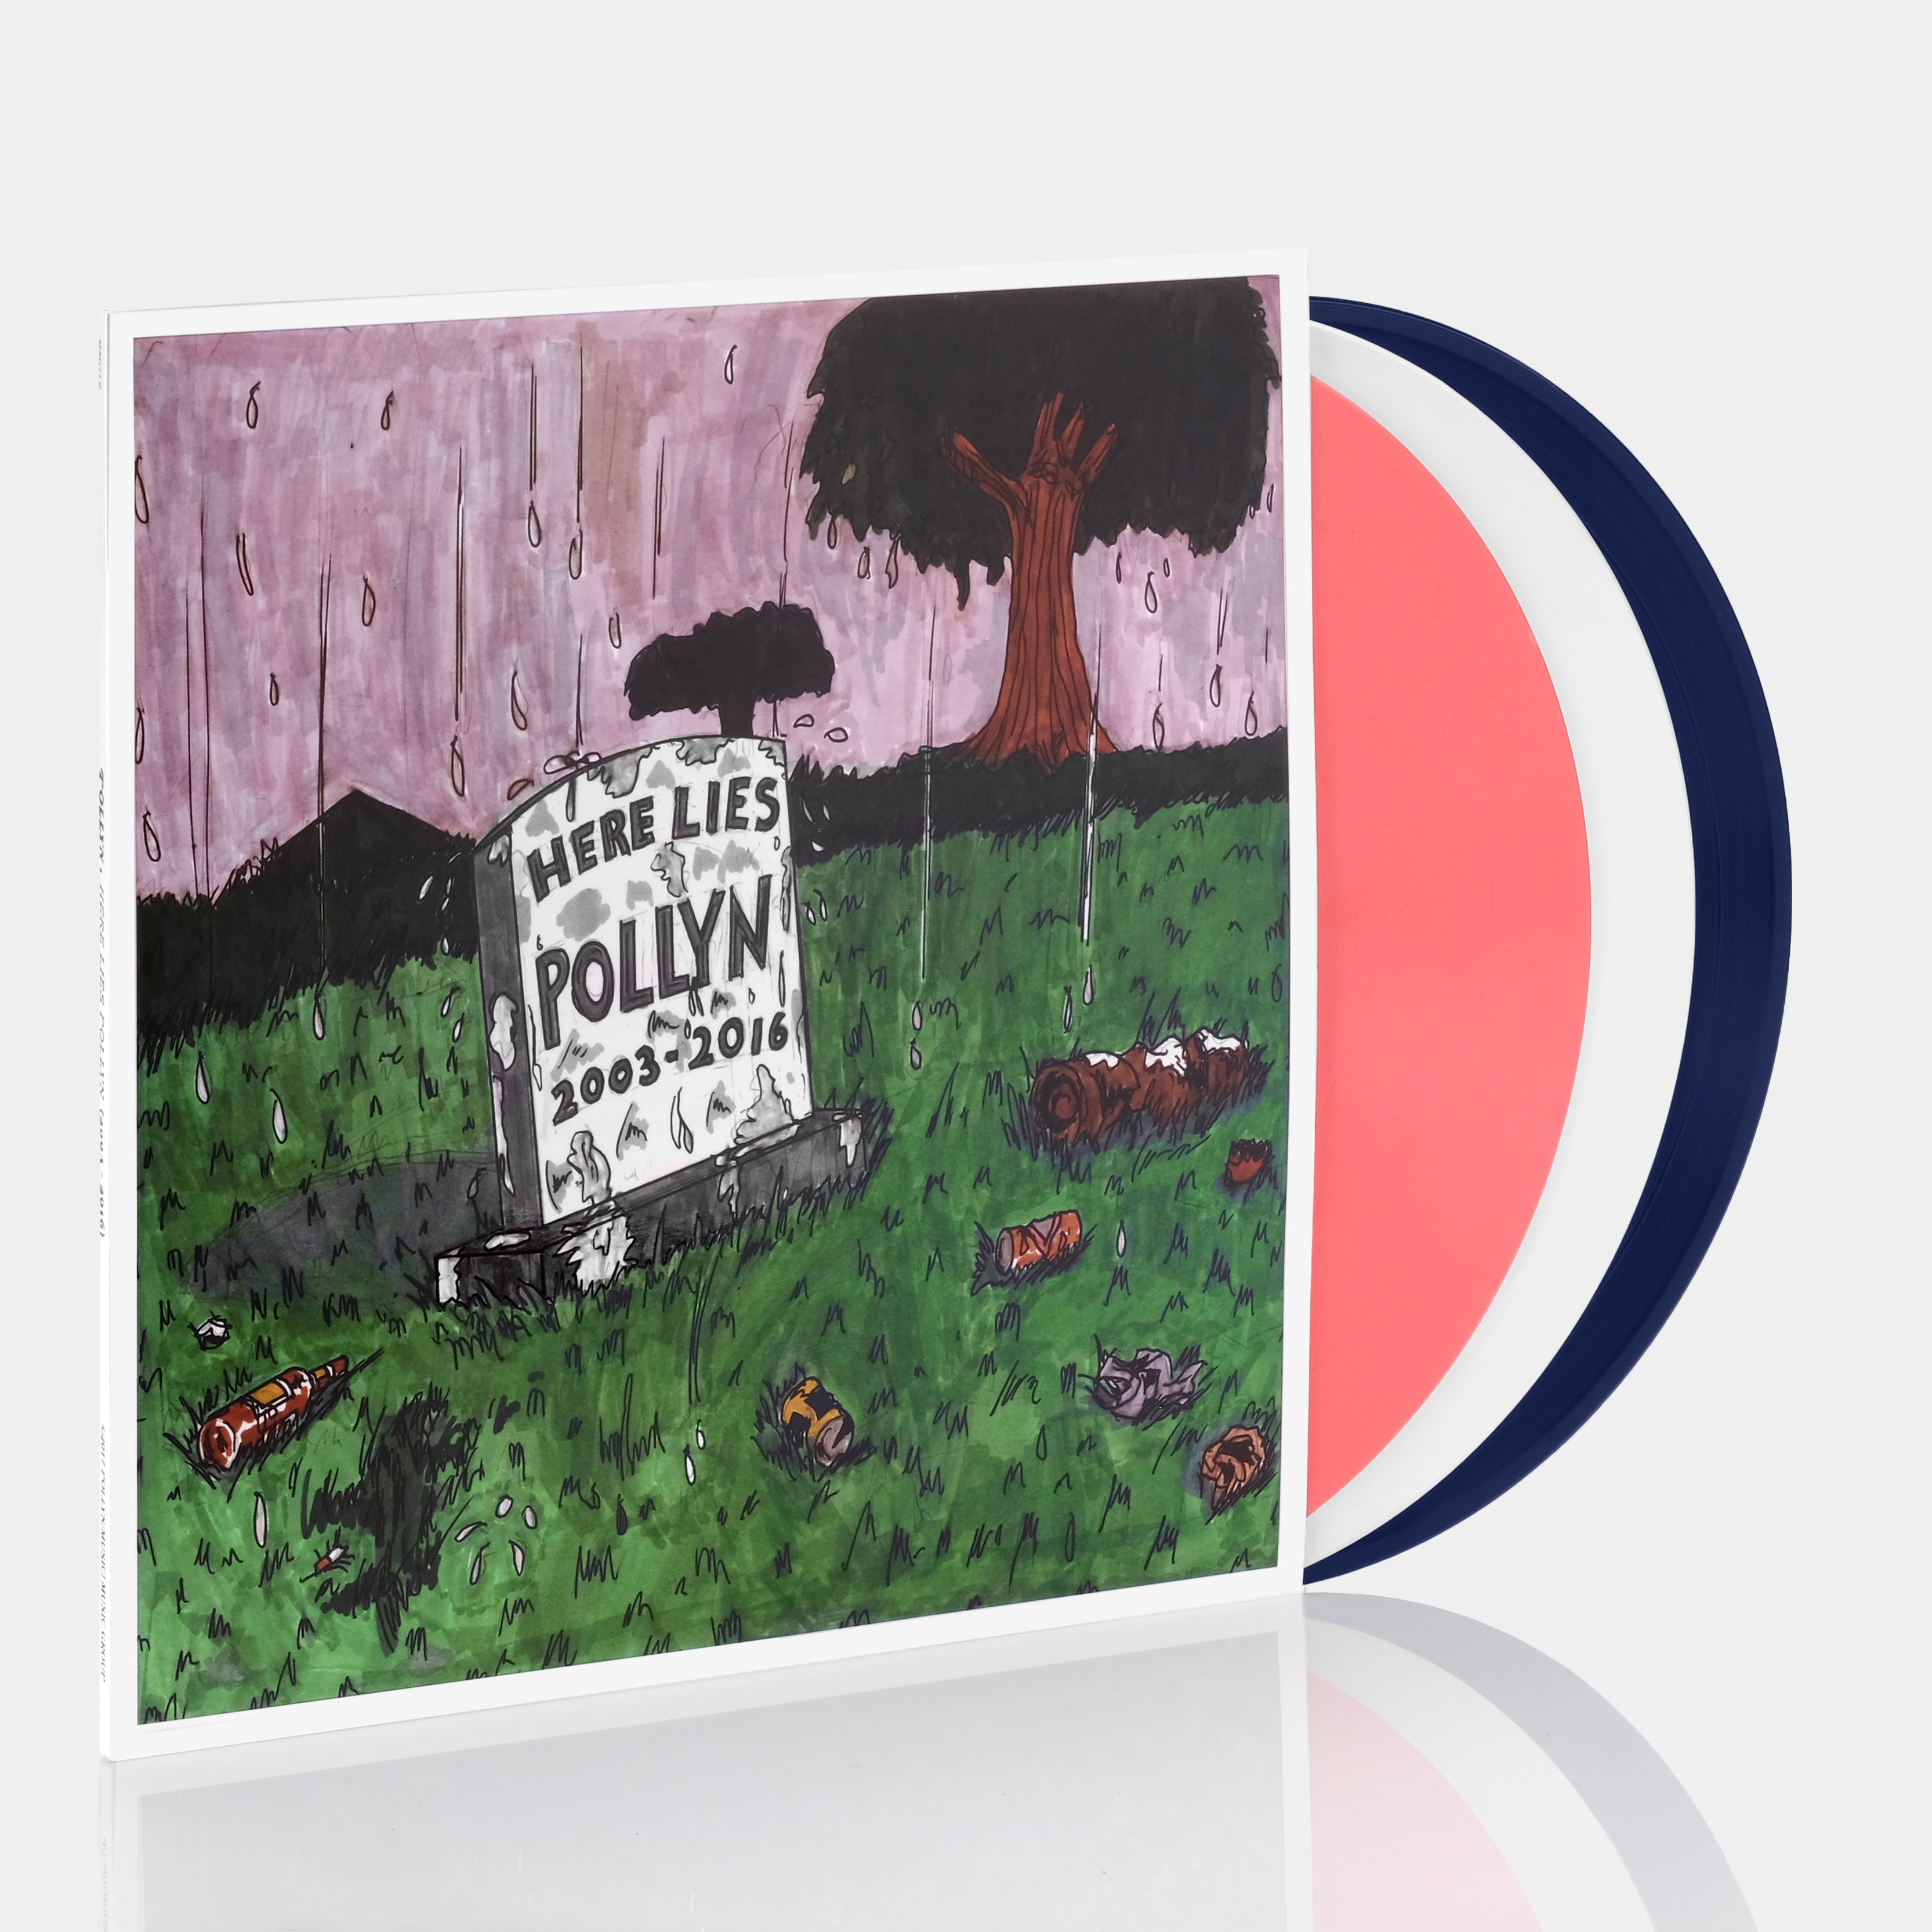 Pollyn - Here Lies Pollyn 2003-2016 3xLP Pink, White and Dark Blue Vinyl Record